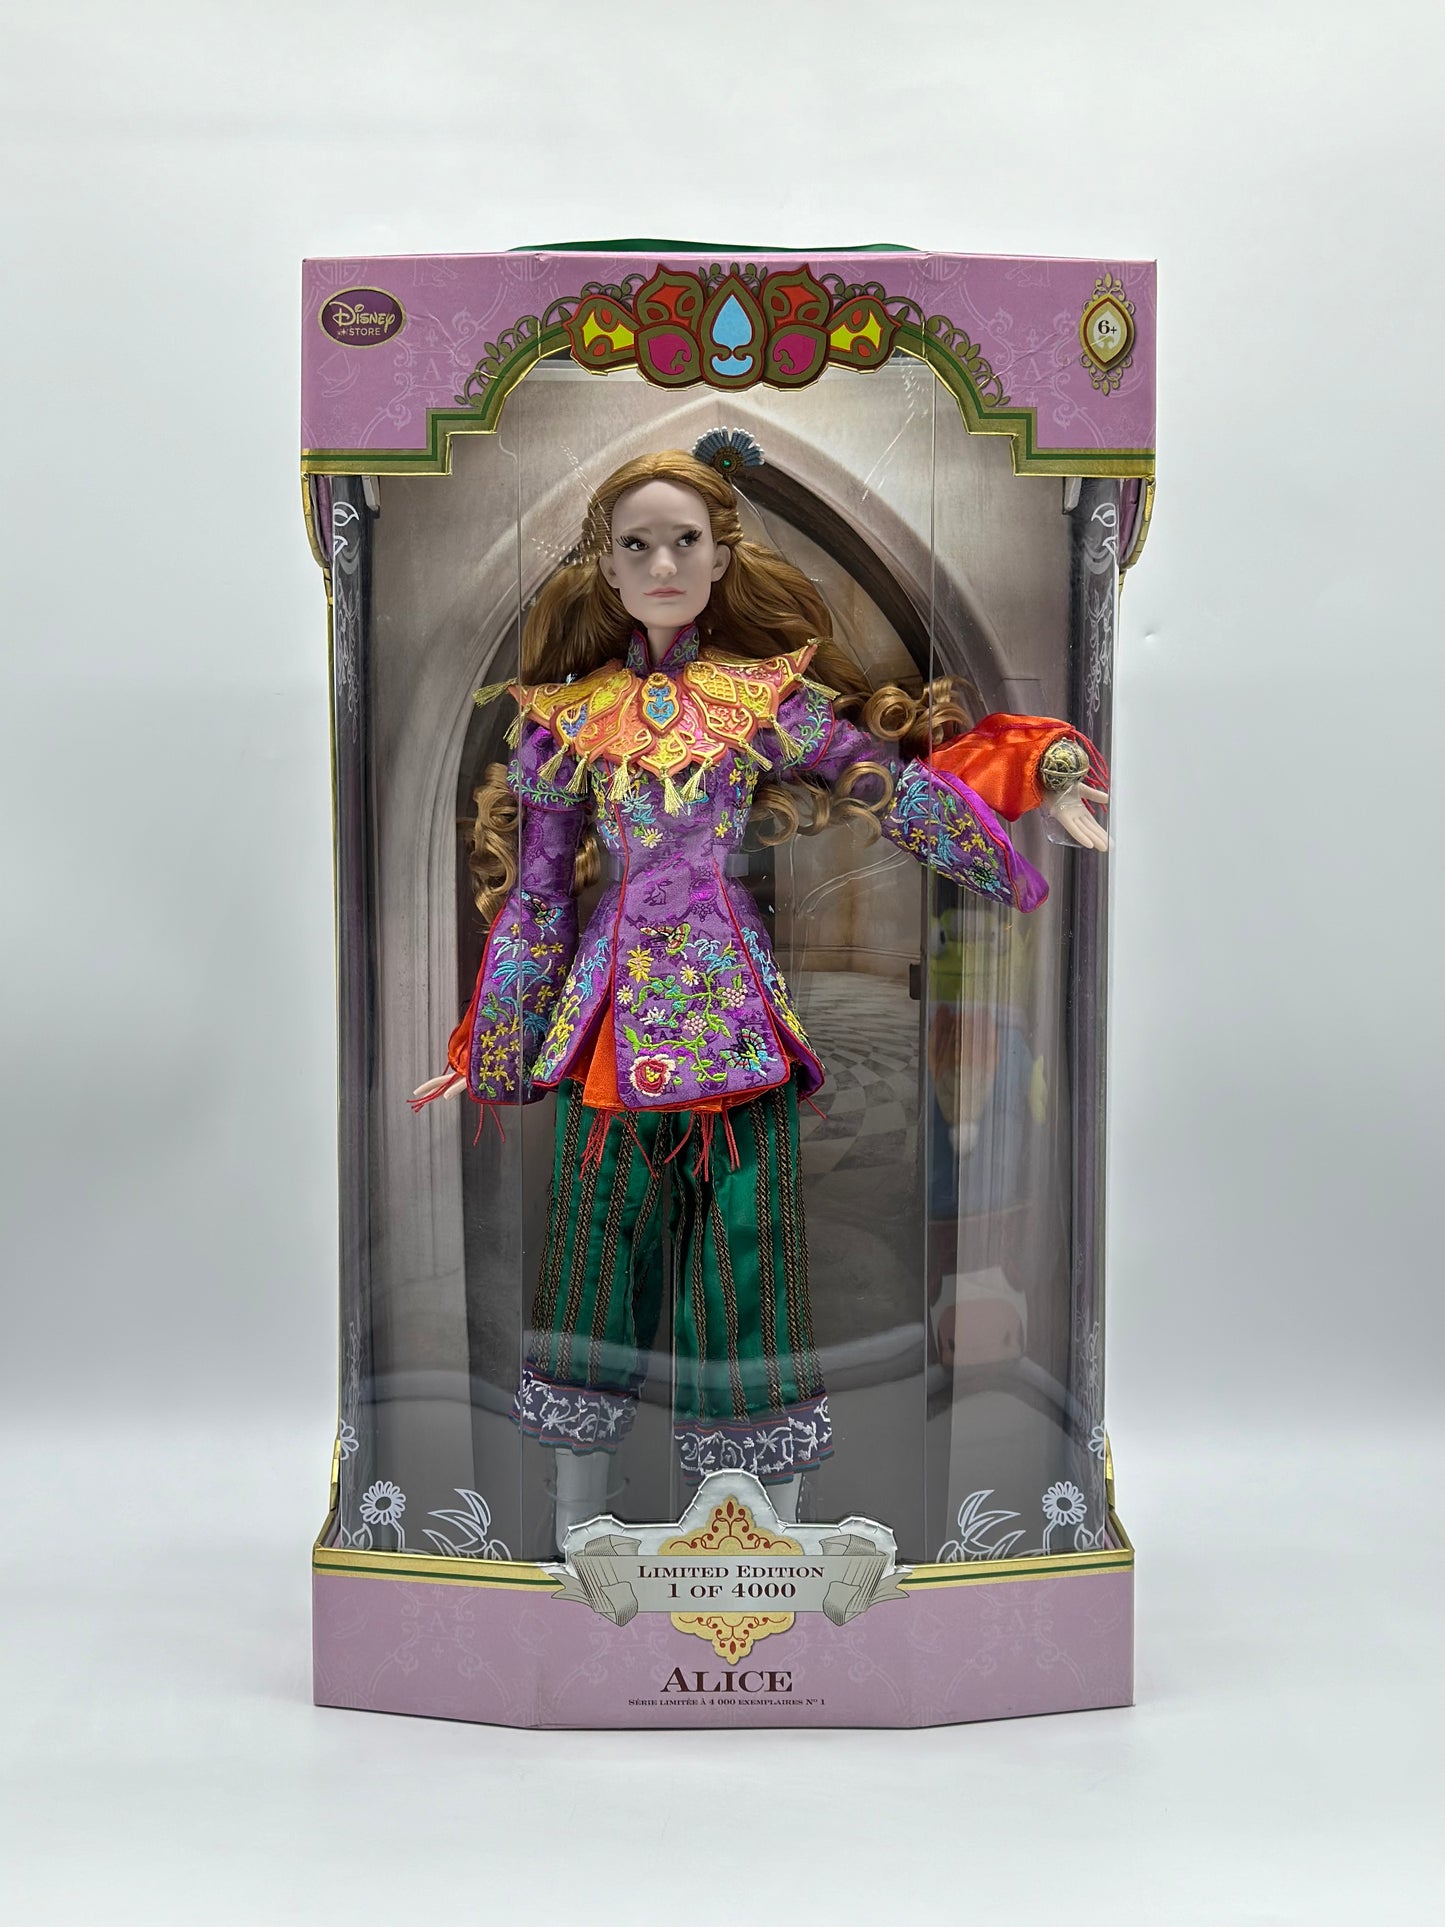 Alice (Live Action) Limited Edition Doll - 1 Of 4000